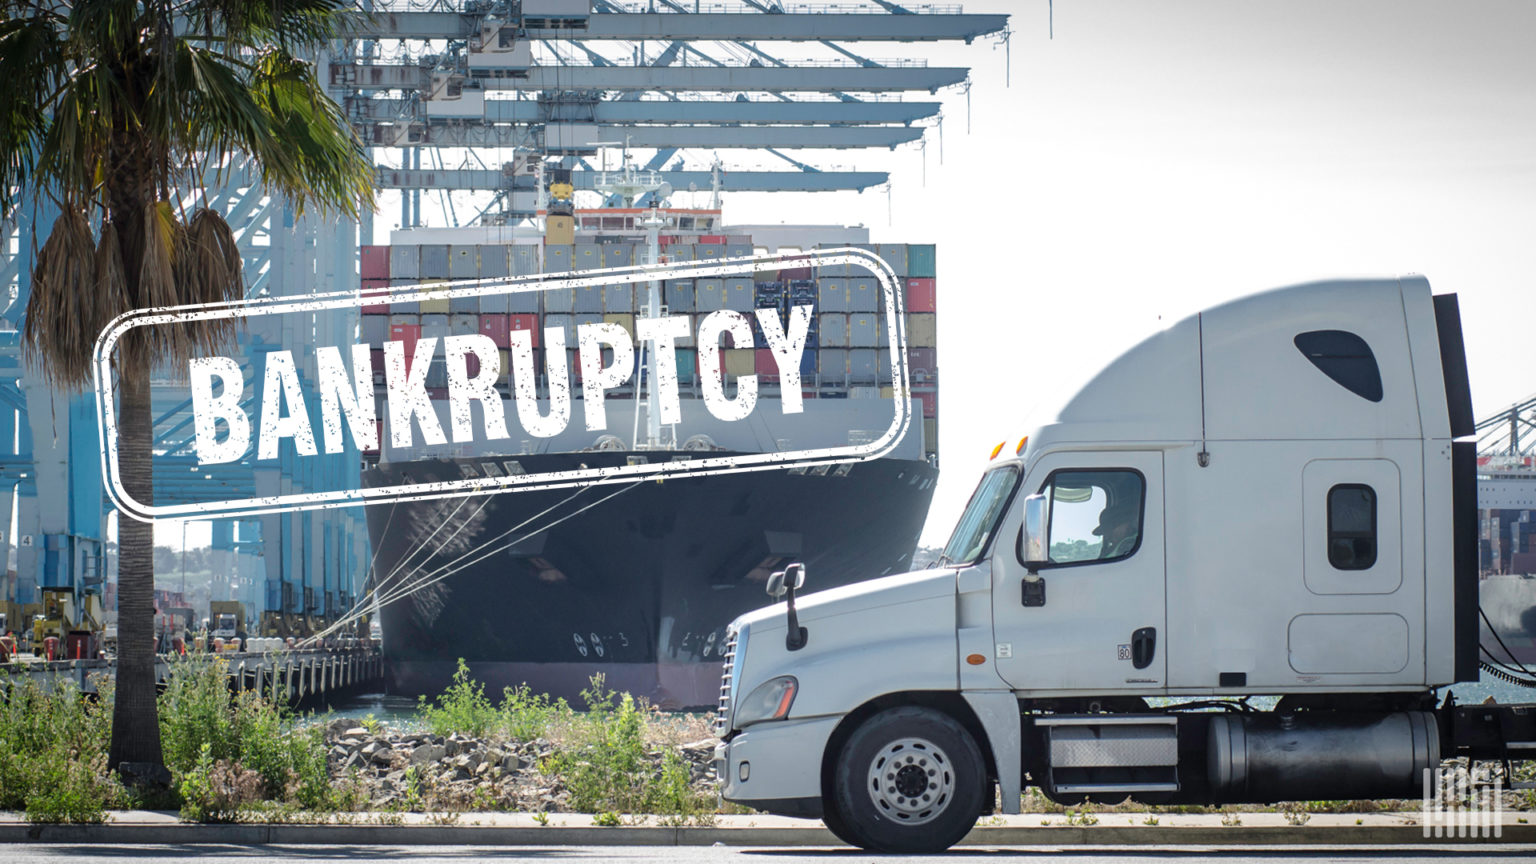 California trucking company shuts down, files for bankruptcy FreightWaves